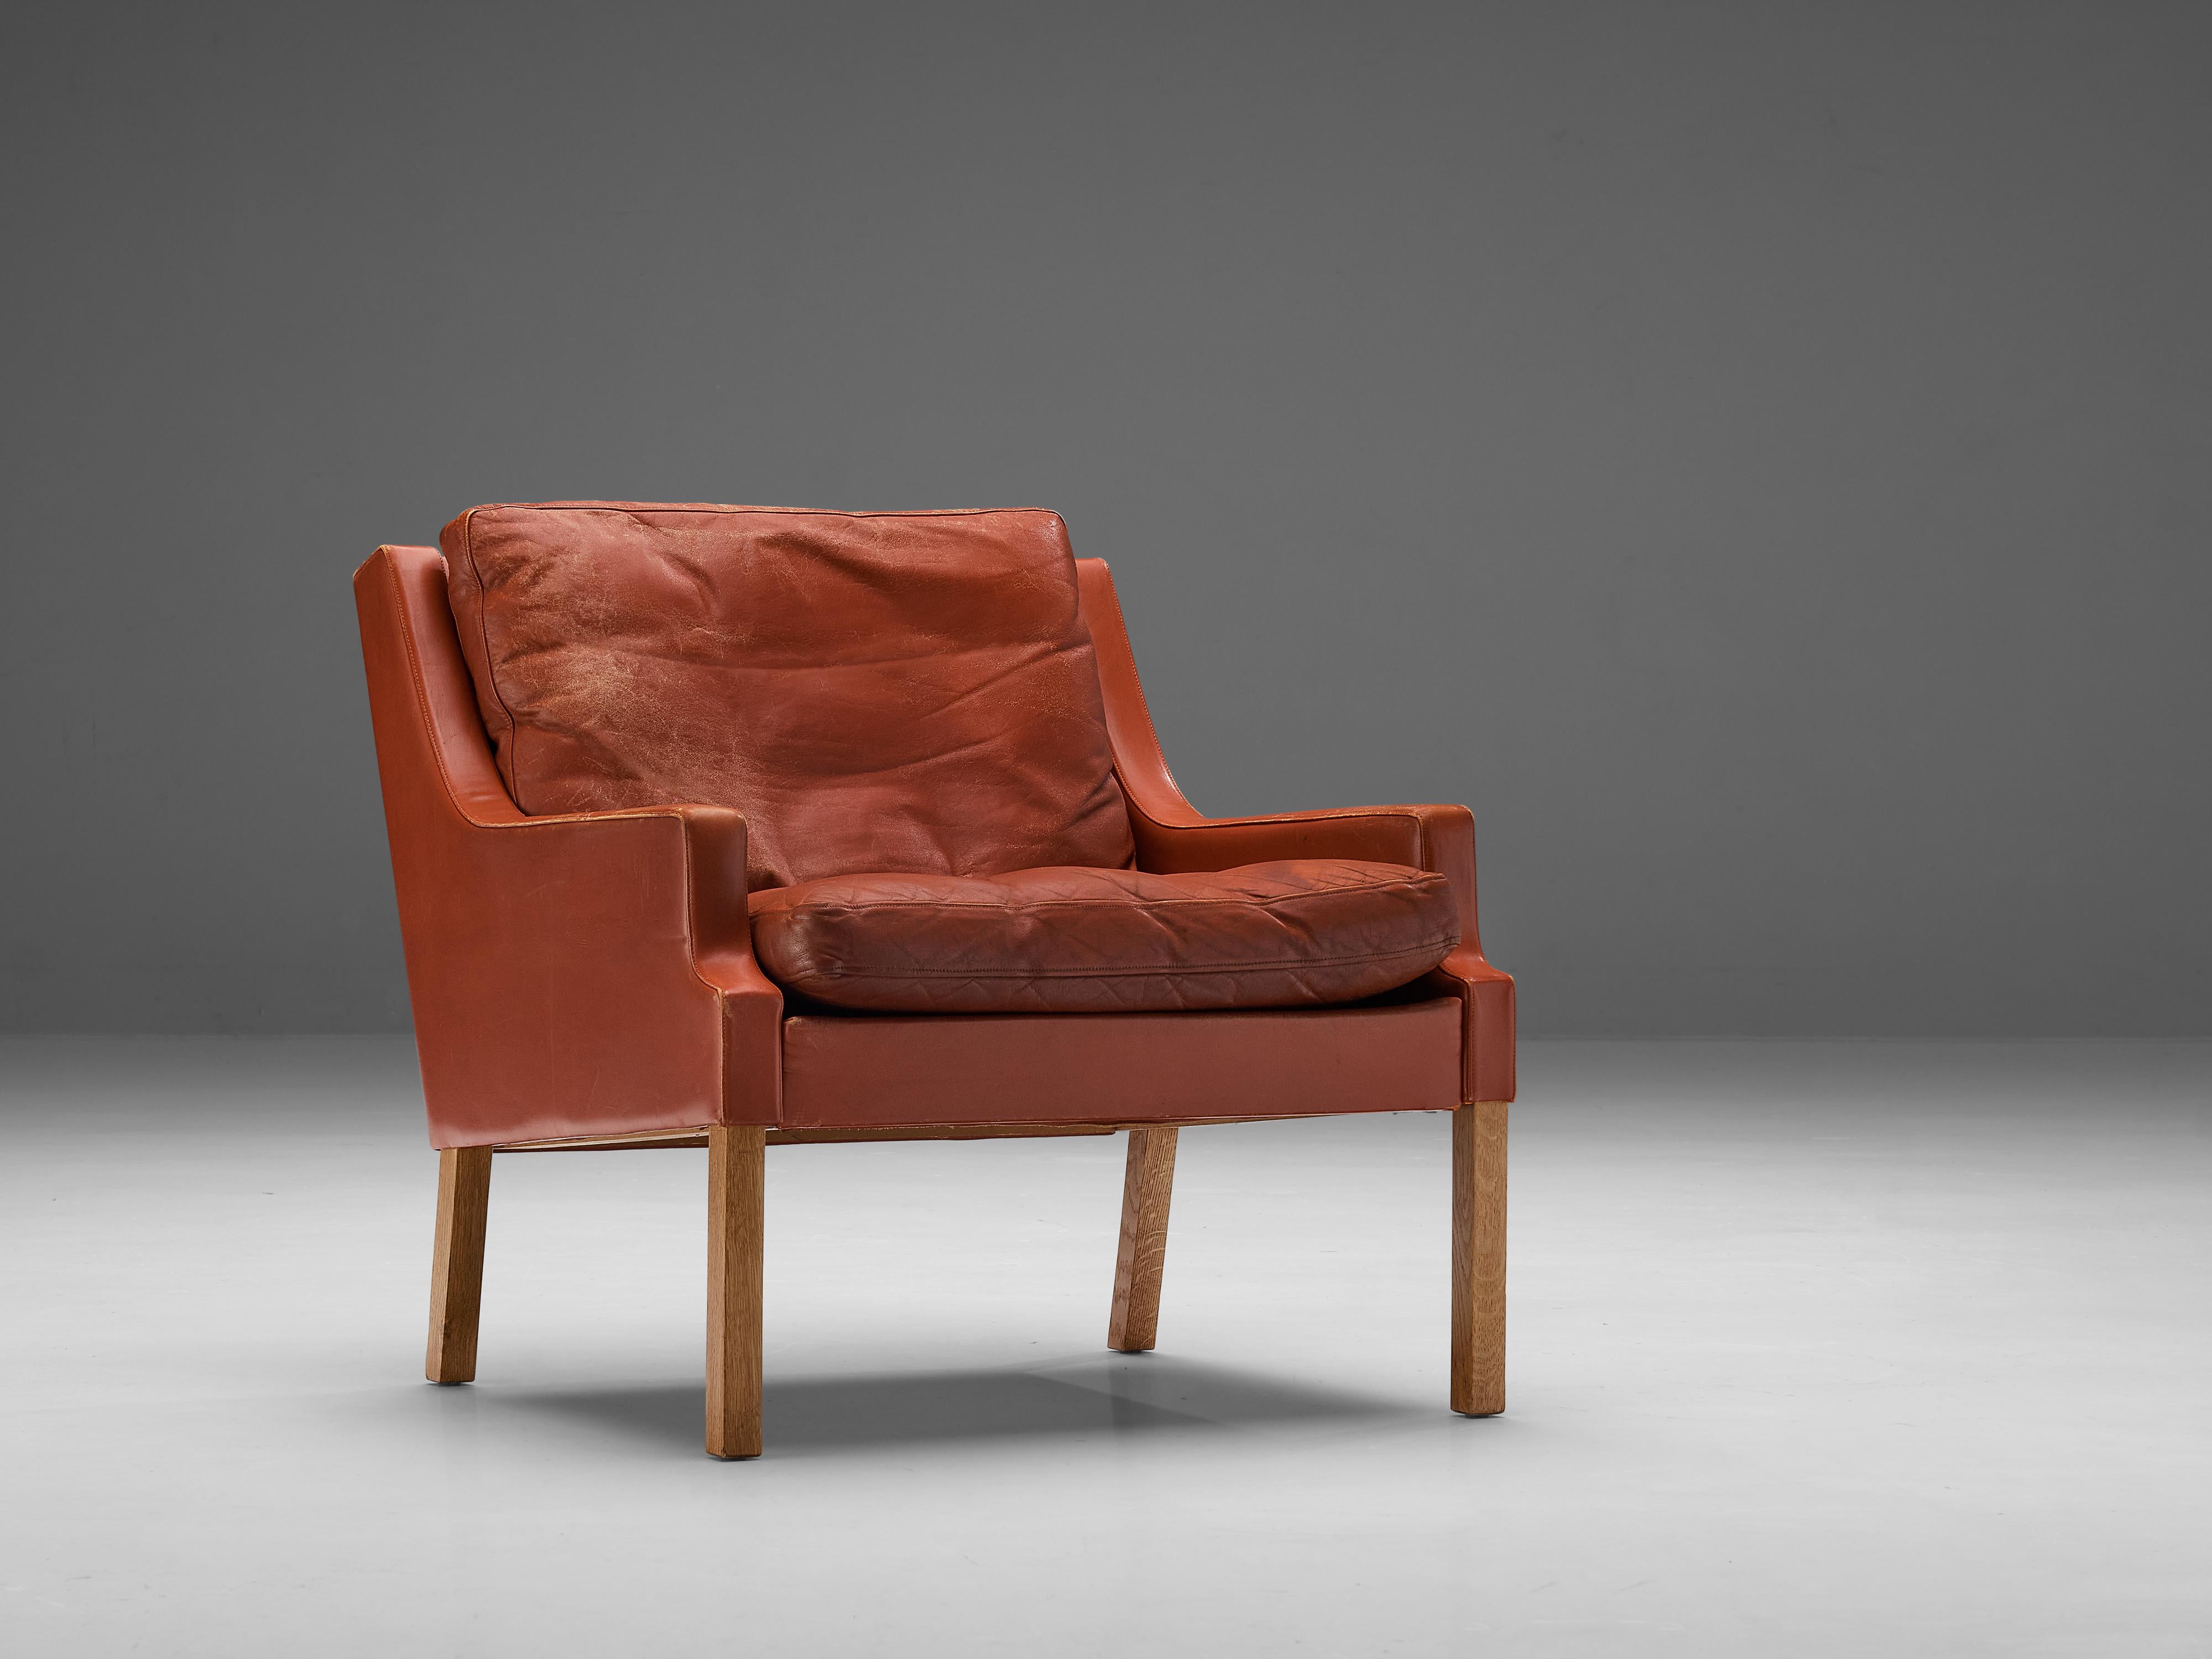 Lounge chair, oak, leather, Denmark, 1950s

Lounge chair with visual references to Børge Morgensen’s designs. The slightly tilted backrest is joined by very low armrests which frame the seat. A patinated seat and backrest cushion provides comfort.